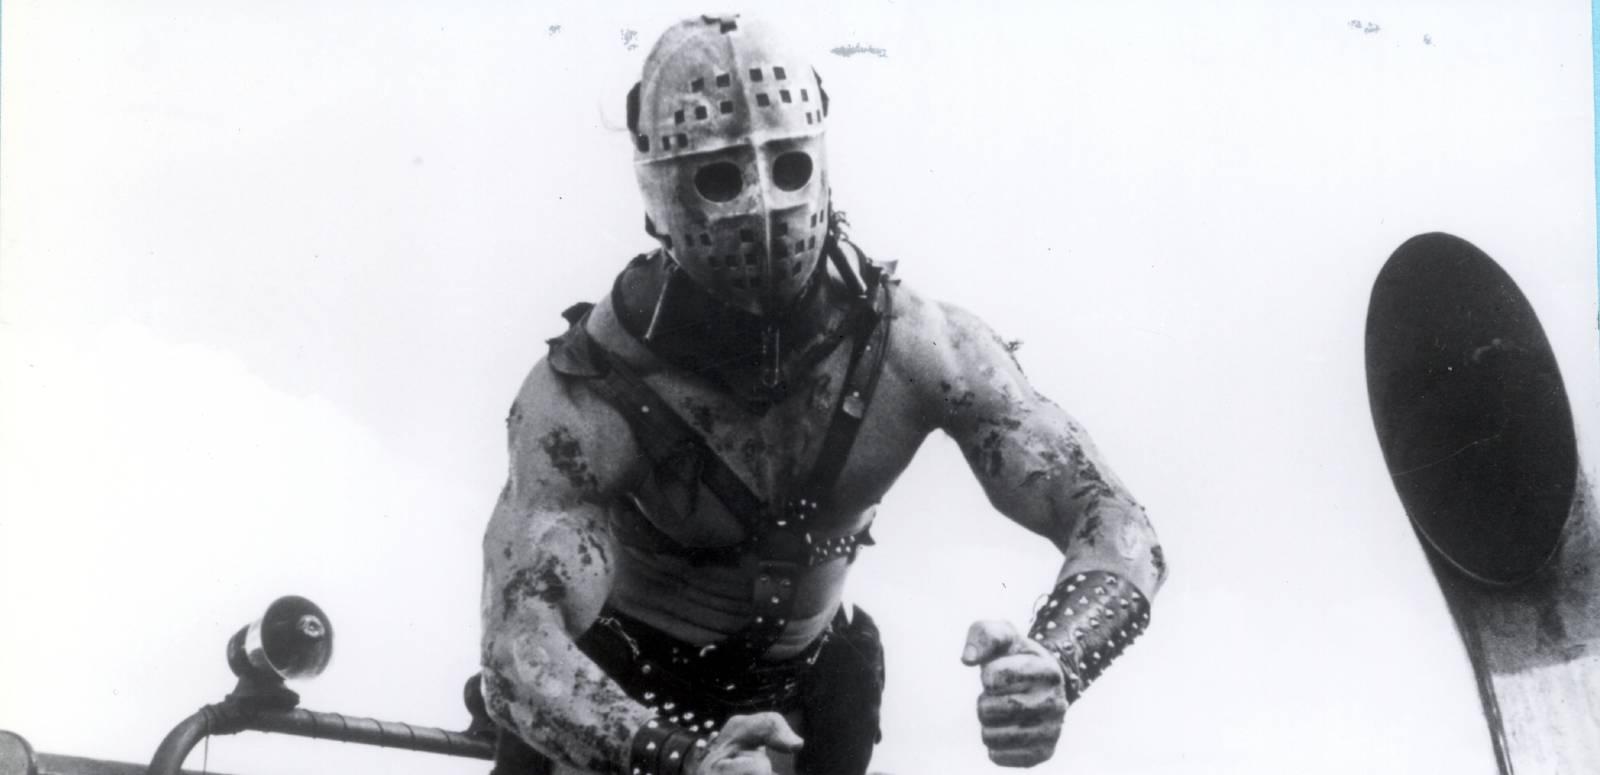 Mad Max 2 villain Humungus strikes a muscular pose with his face covered by a hockey mask